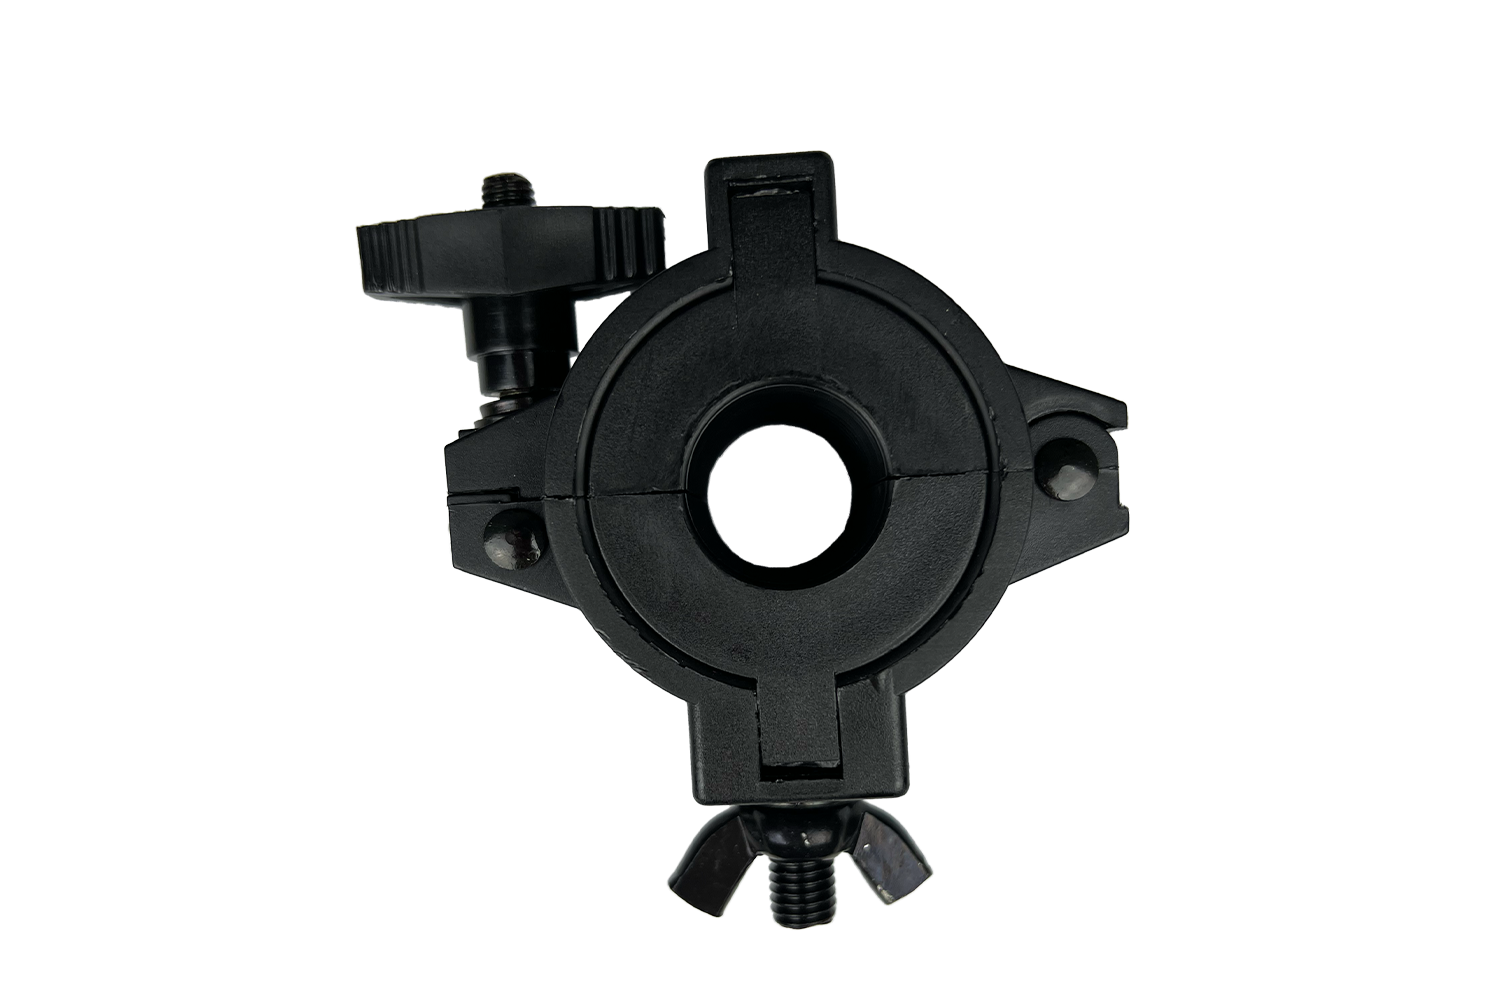 CLAMPE38 - Variable Diameter Clamp (Suits 25, 38 or 50mm) - Black